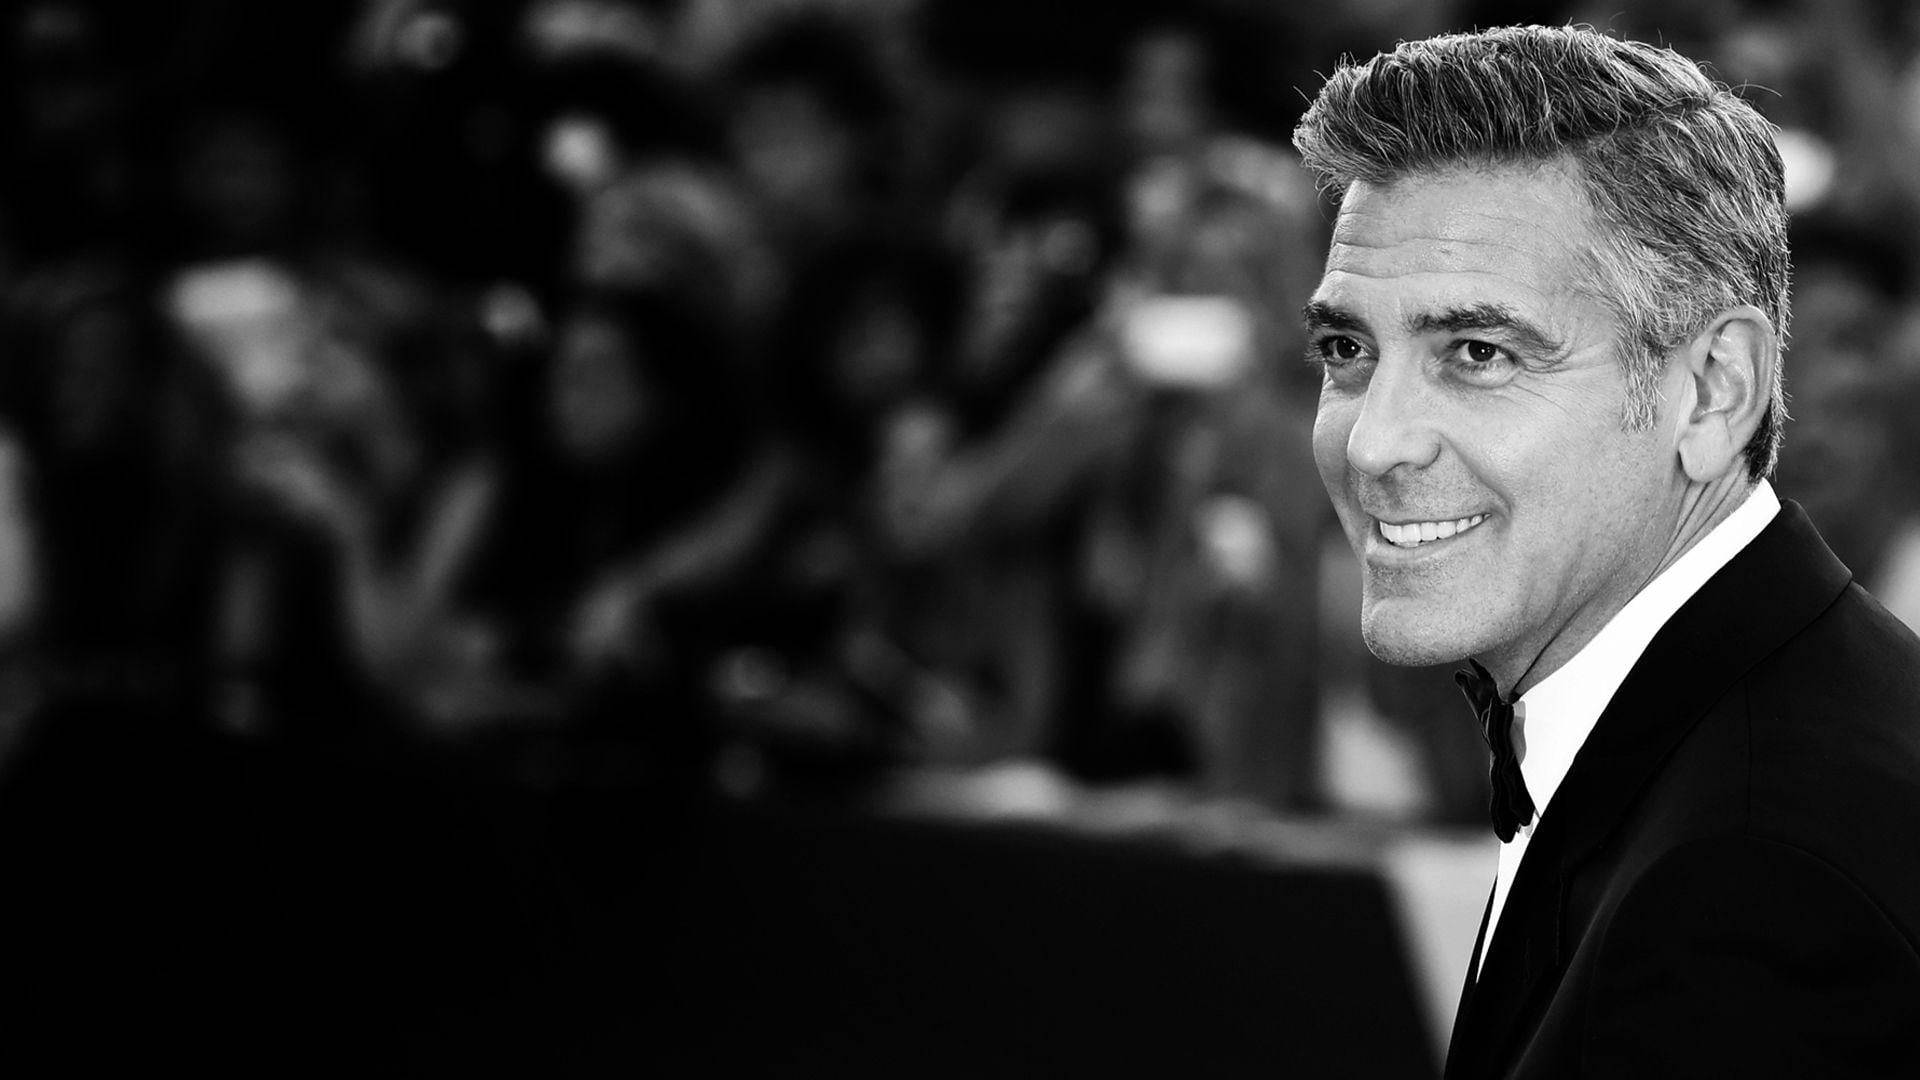 George Clooney Smiling Black And White Wallpaper